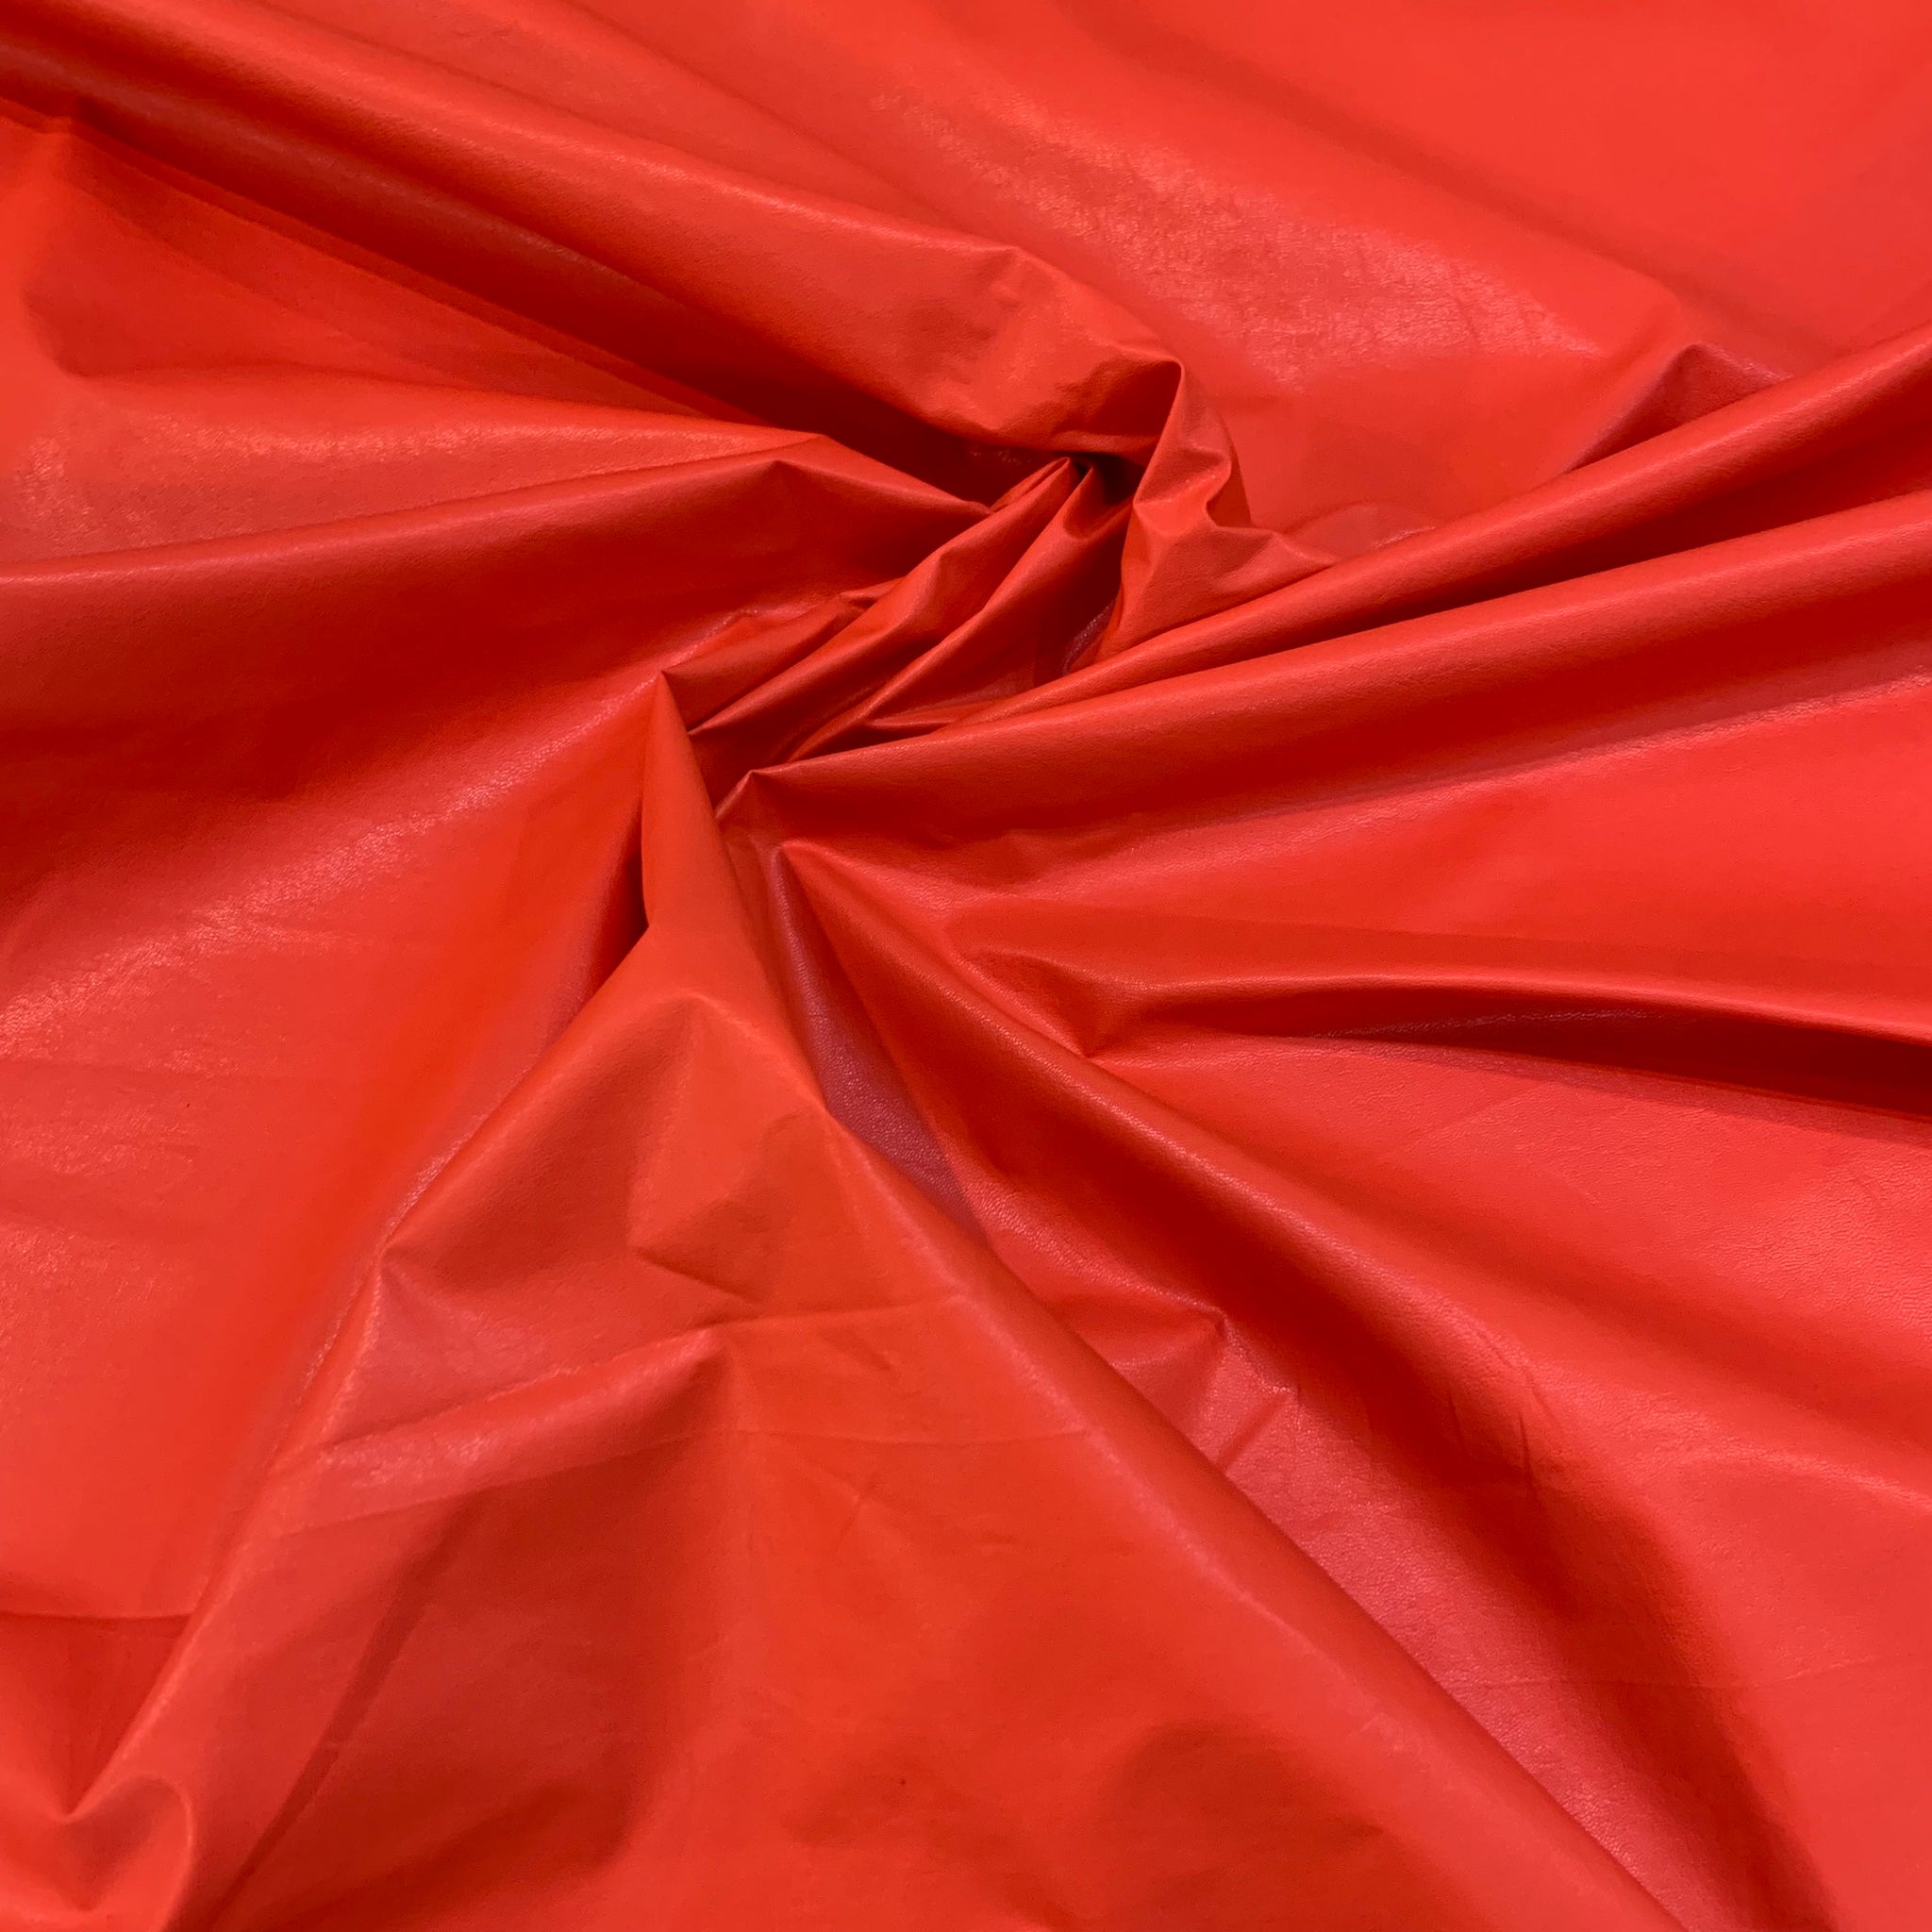 Cotton Backed Faux Leather Fabric - Tomato Red